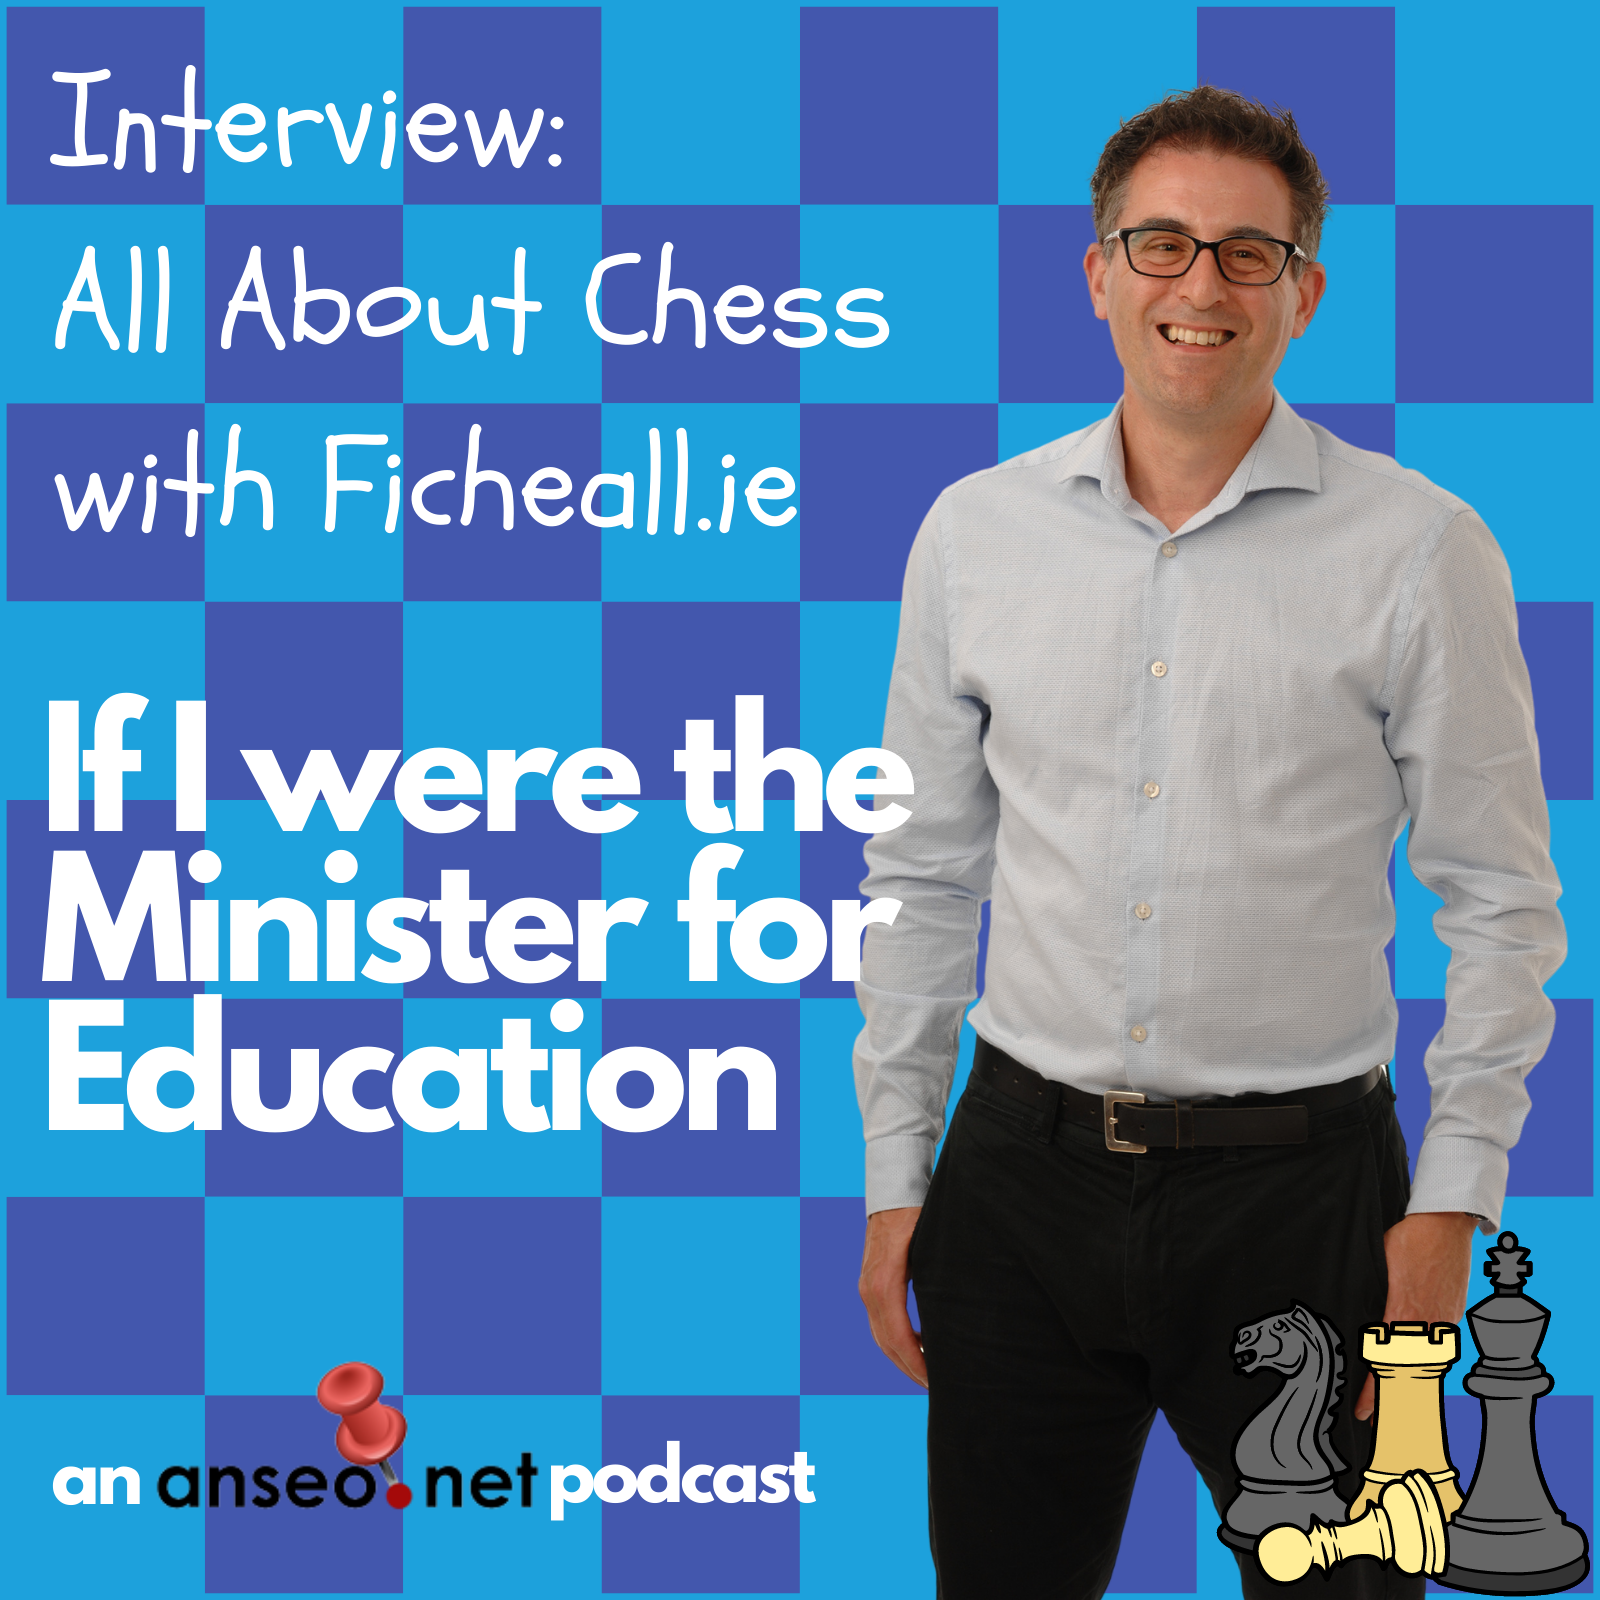 Artwork for podcast Anseo.net - If I were the Minister for Education